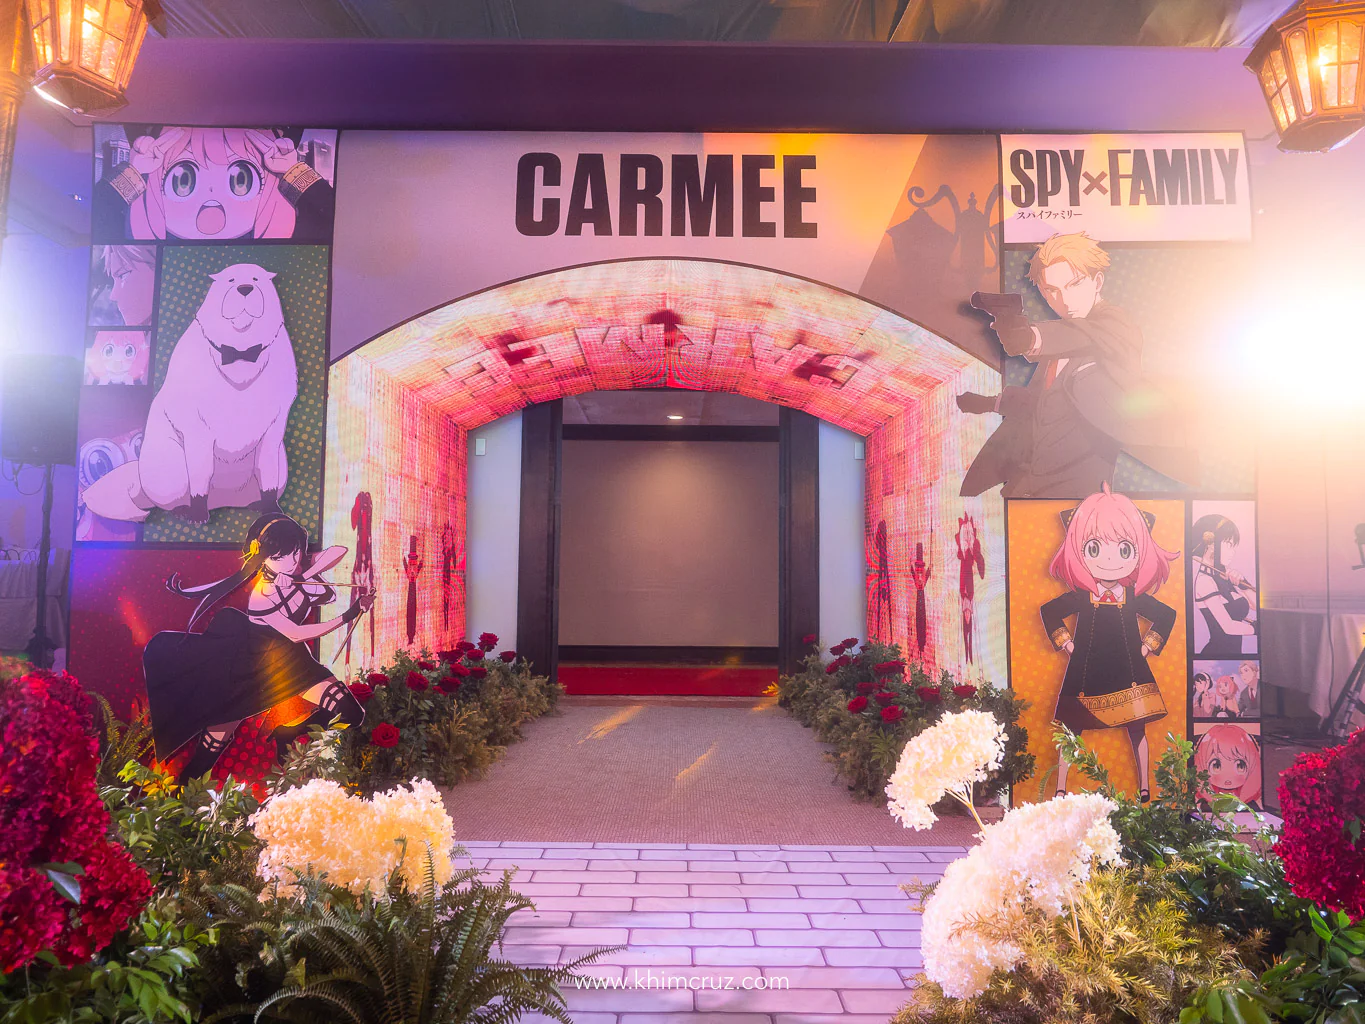 curved animated LED wall tunnel design for spy x family birthday party